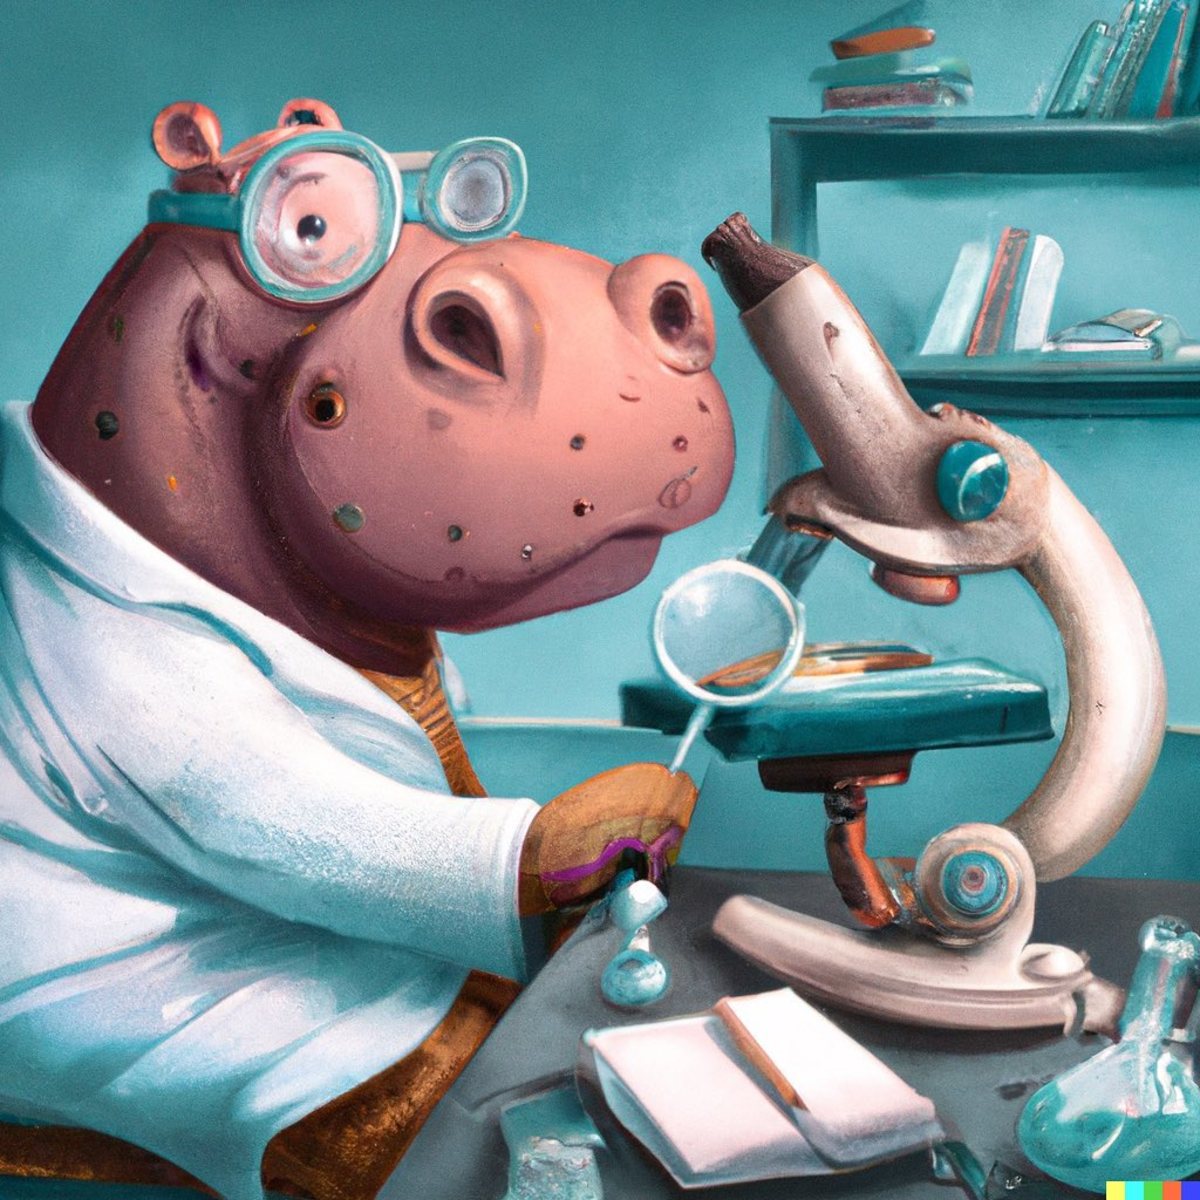 A scientist hippopotamus inspecting a sample with a microscope, digital art  (Actual text prompt used)